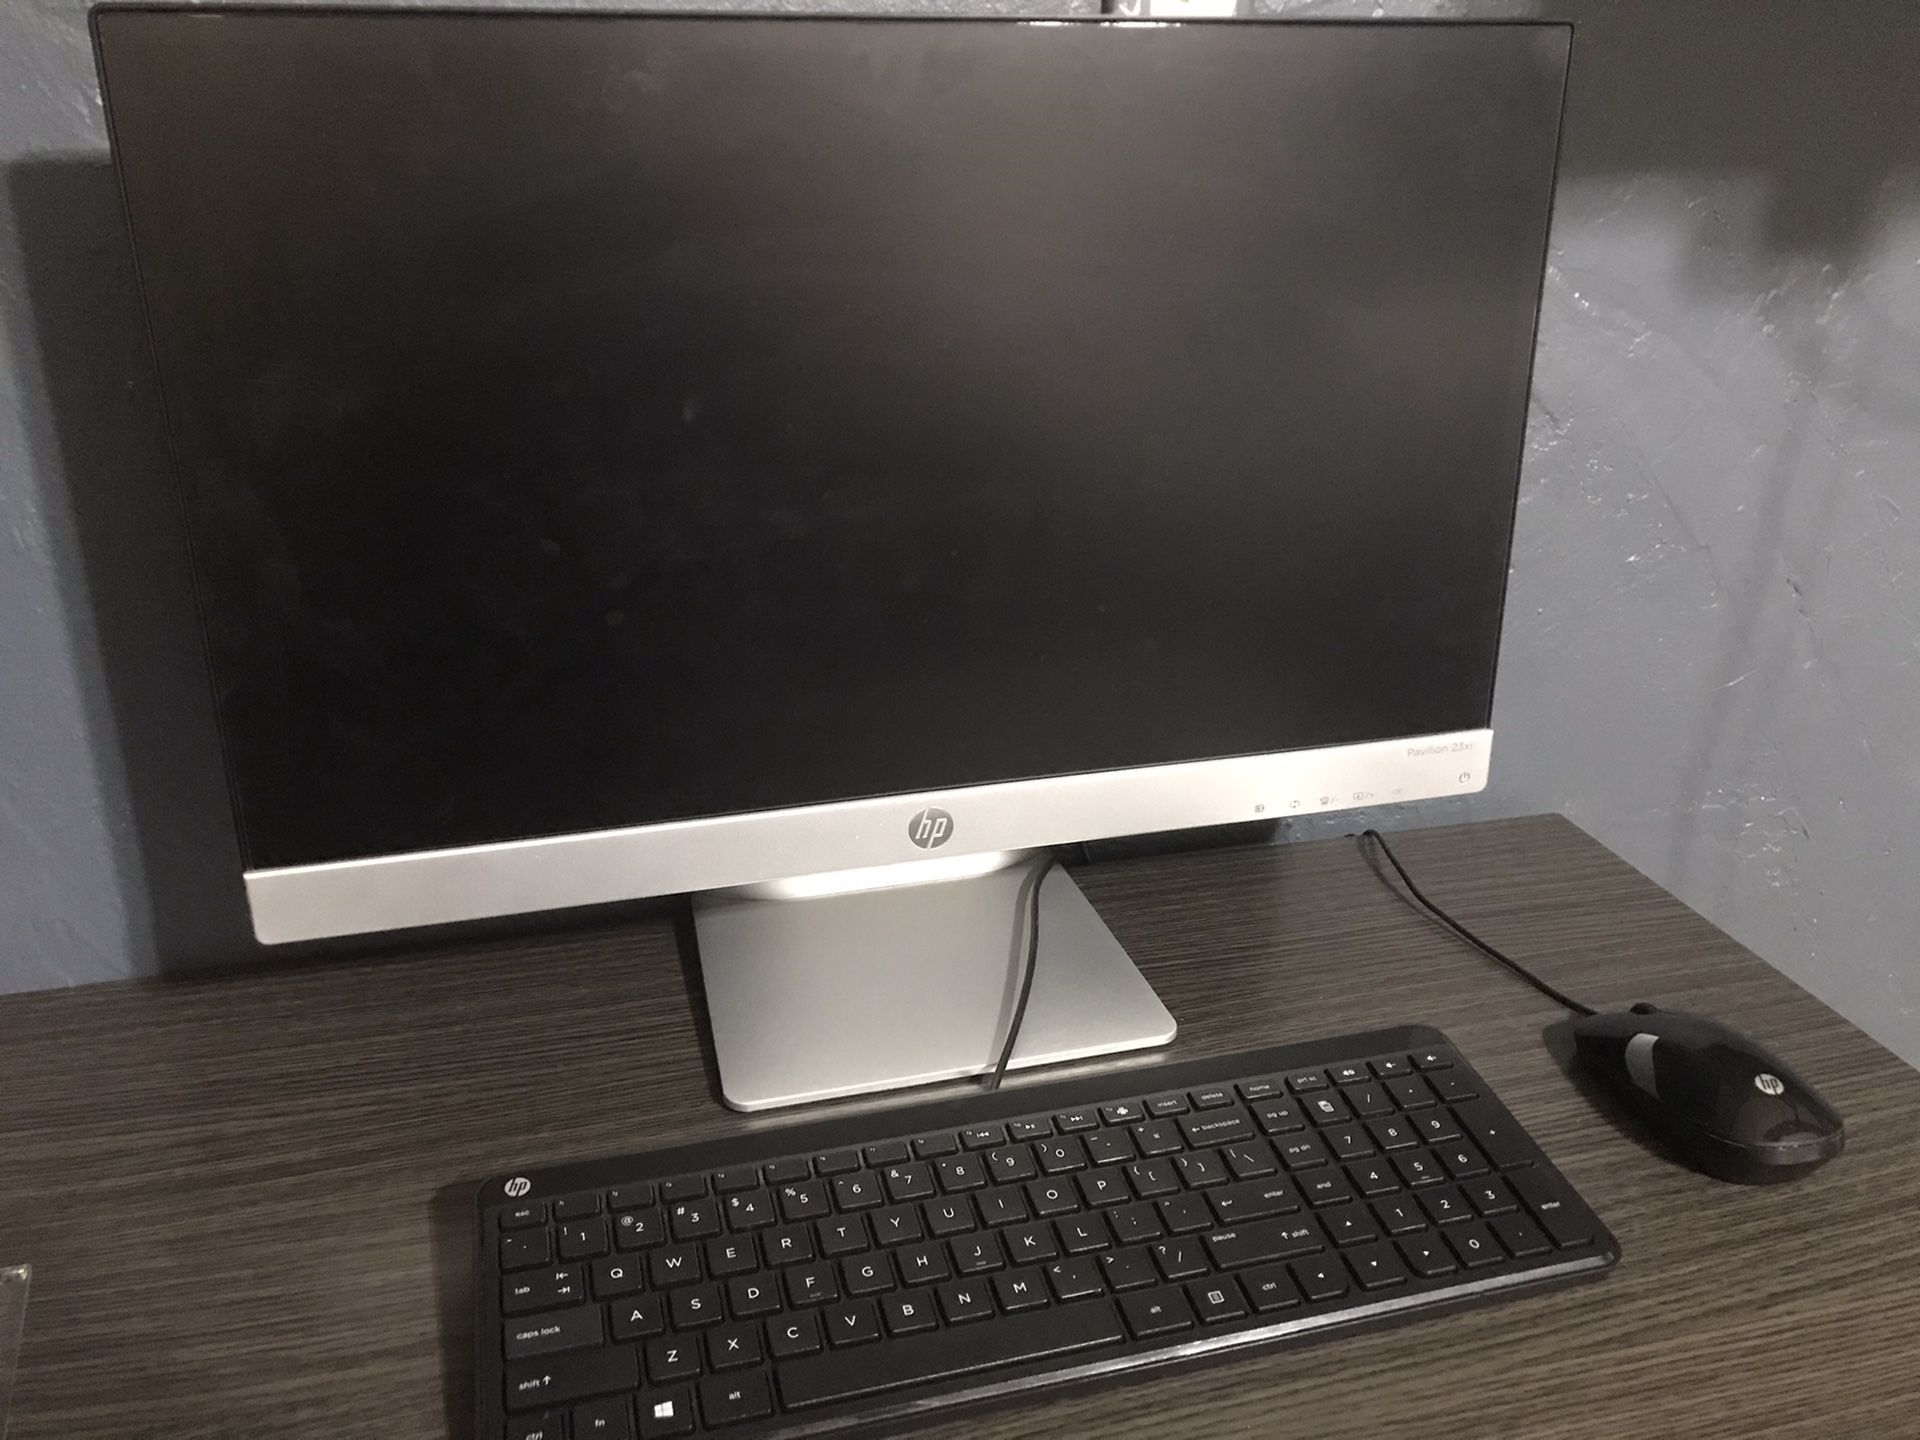 HP Desktop computer / can be sold as separate pieces